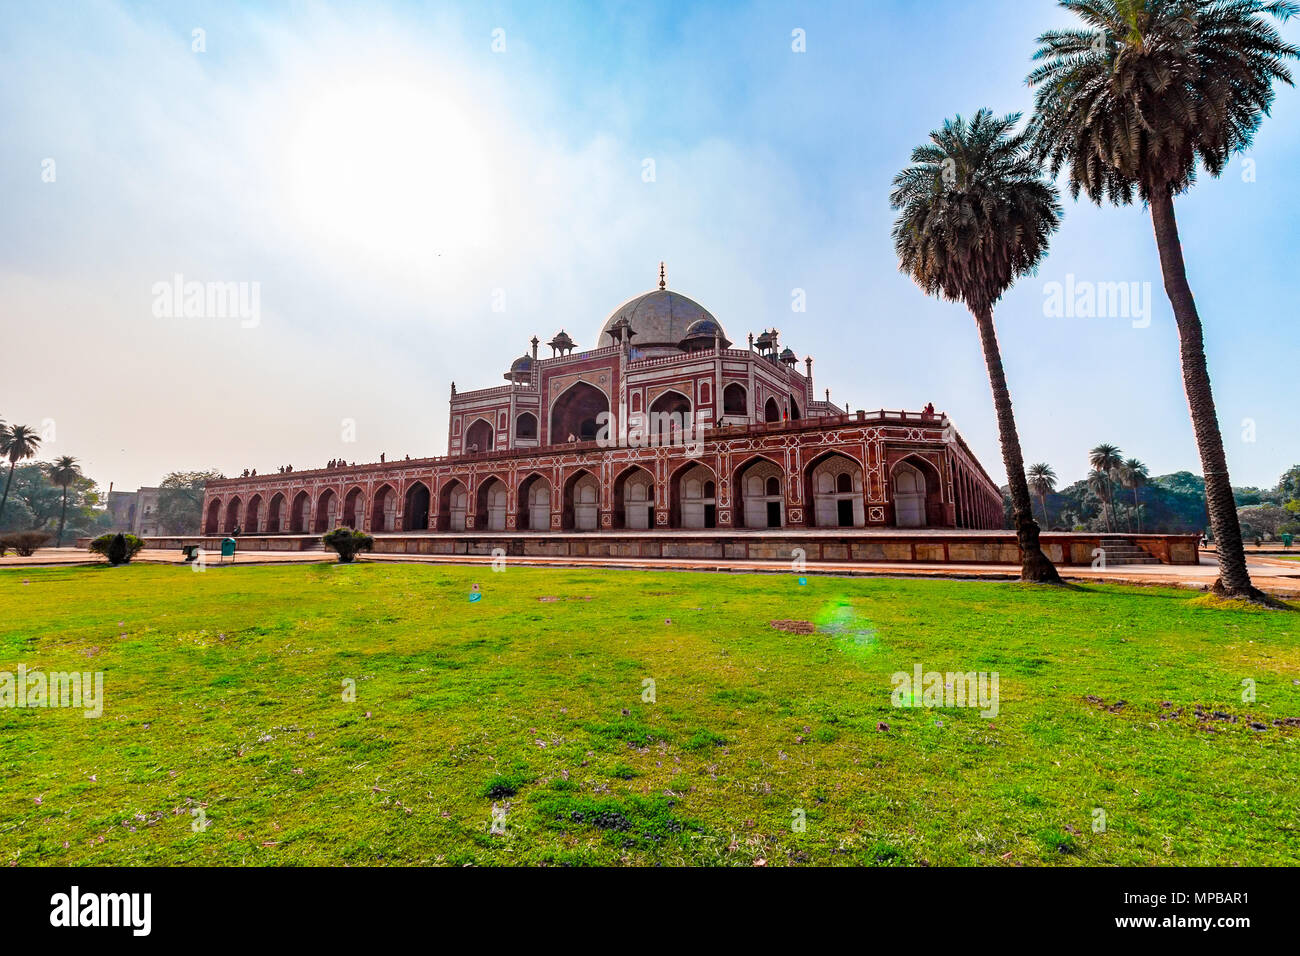 Royal views of the first garden-tomb on the Indian subcontinent. The Tomb is an excellent example of Persian architecture. Stock Photo